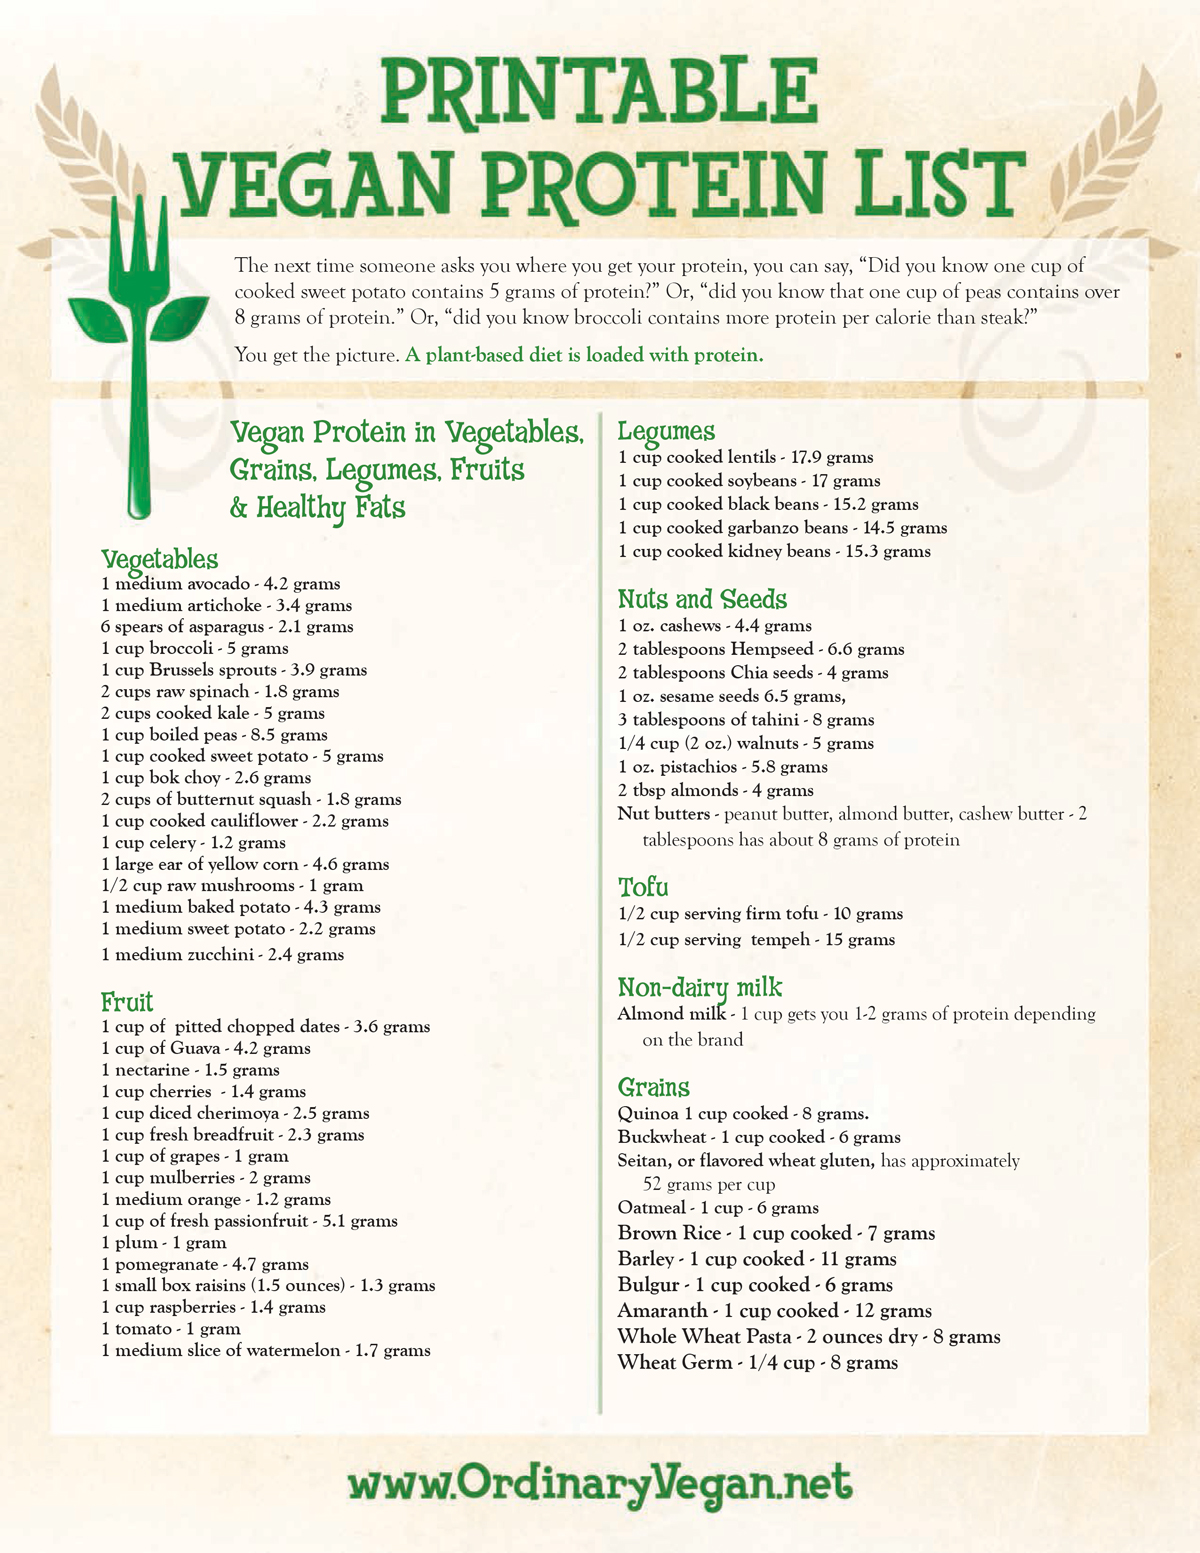 Vegan Protein List Seed Comparison Chart,How To Sharpen A Knife With A Grinder